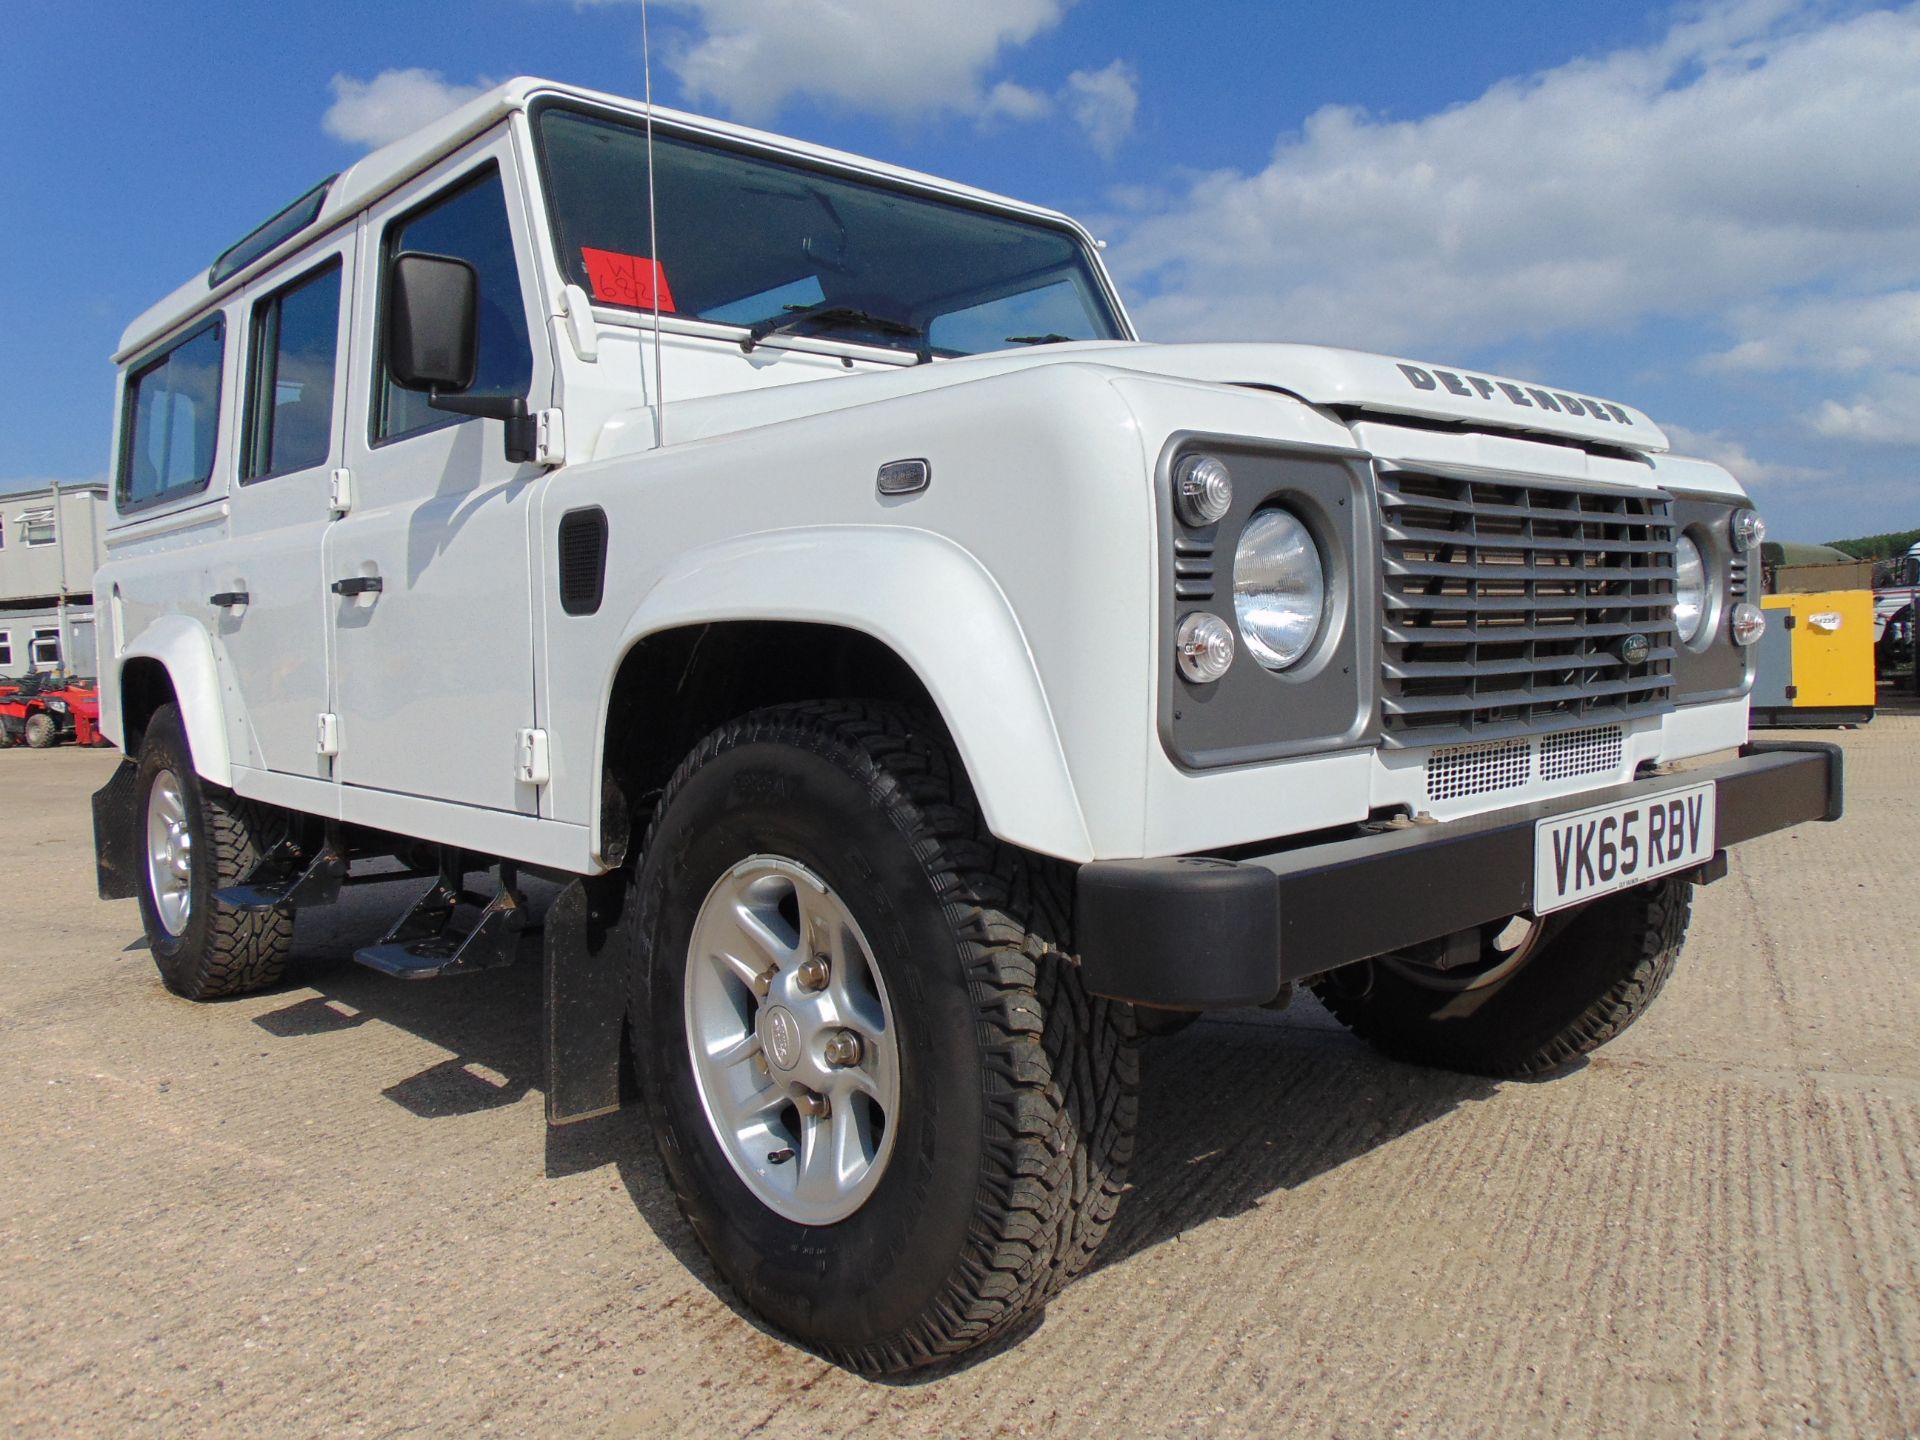 2015 Land Rover Defender 110 5 Door County Station Wagon ONLY 8,712 Miles!!! - Image 9 of 26